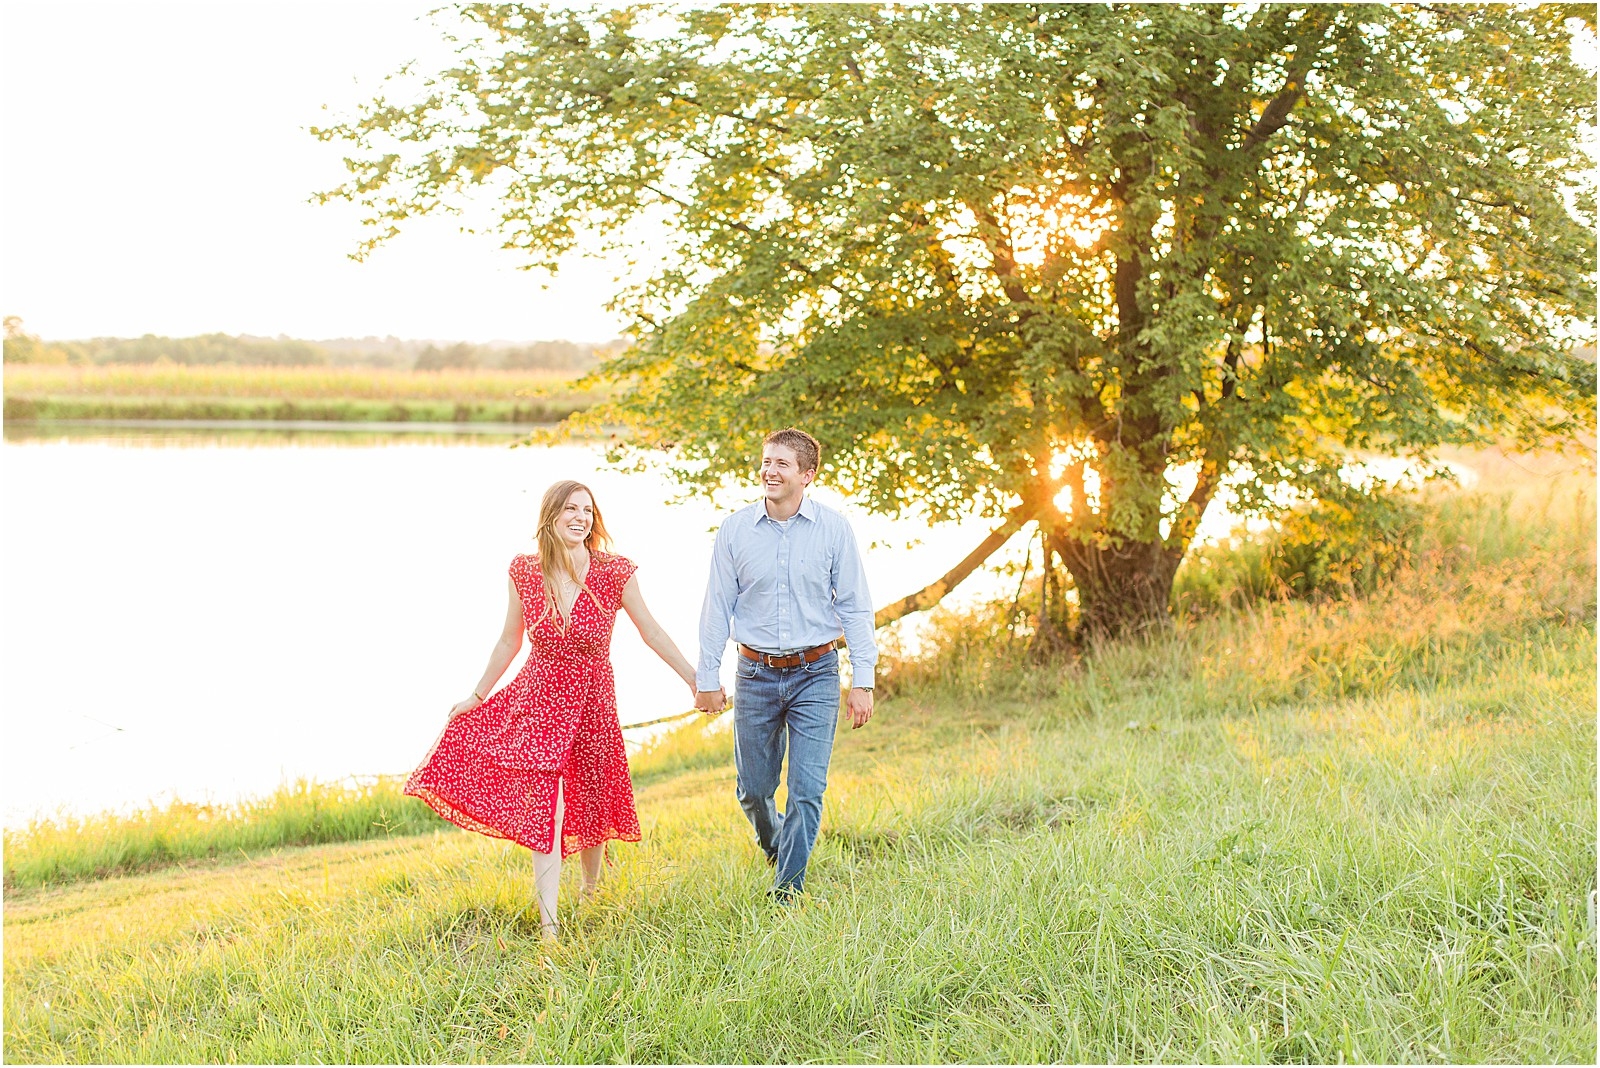 A Jasper Indiana Engagement Session | Tori and Kyle | Bret and Brandie Photography043.jpg